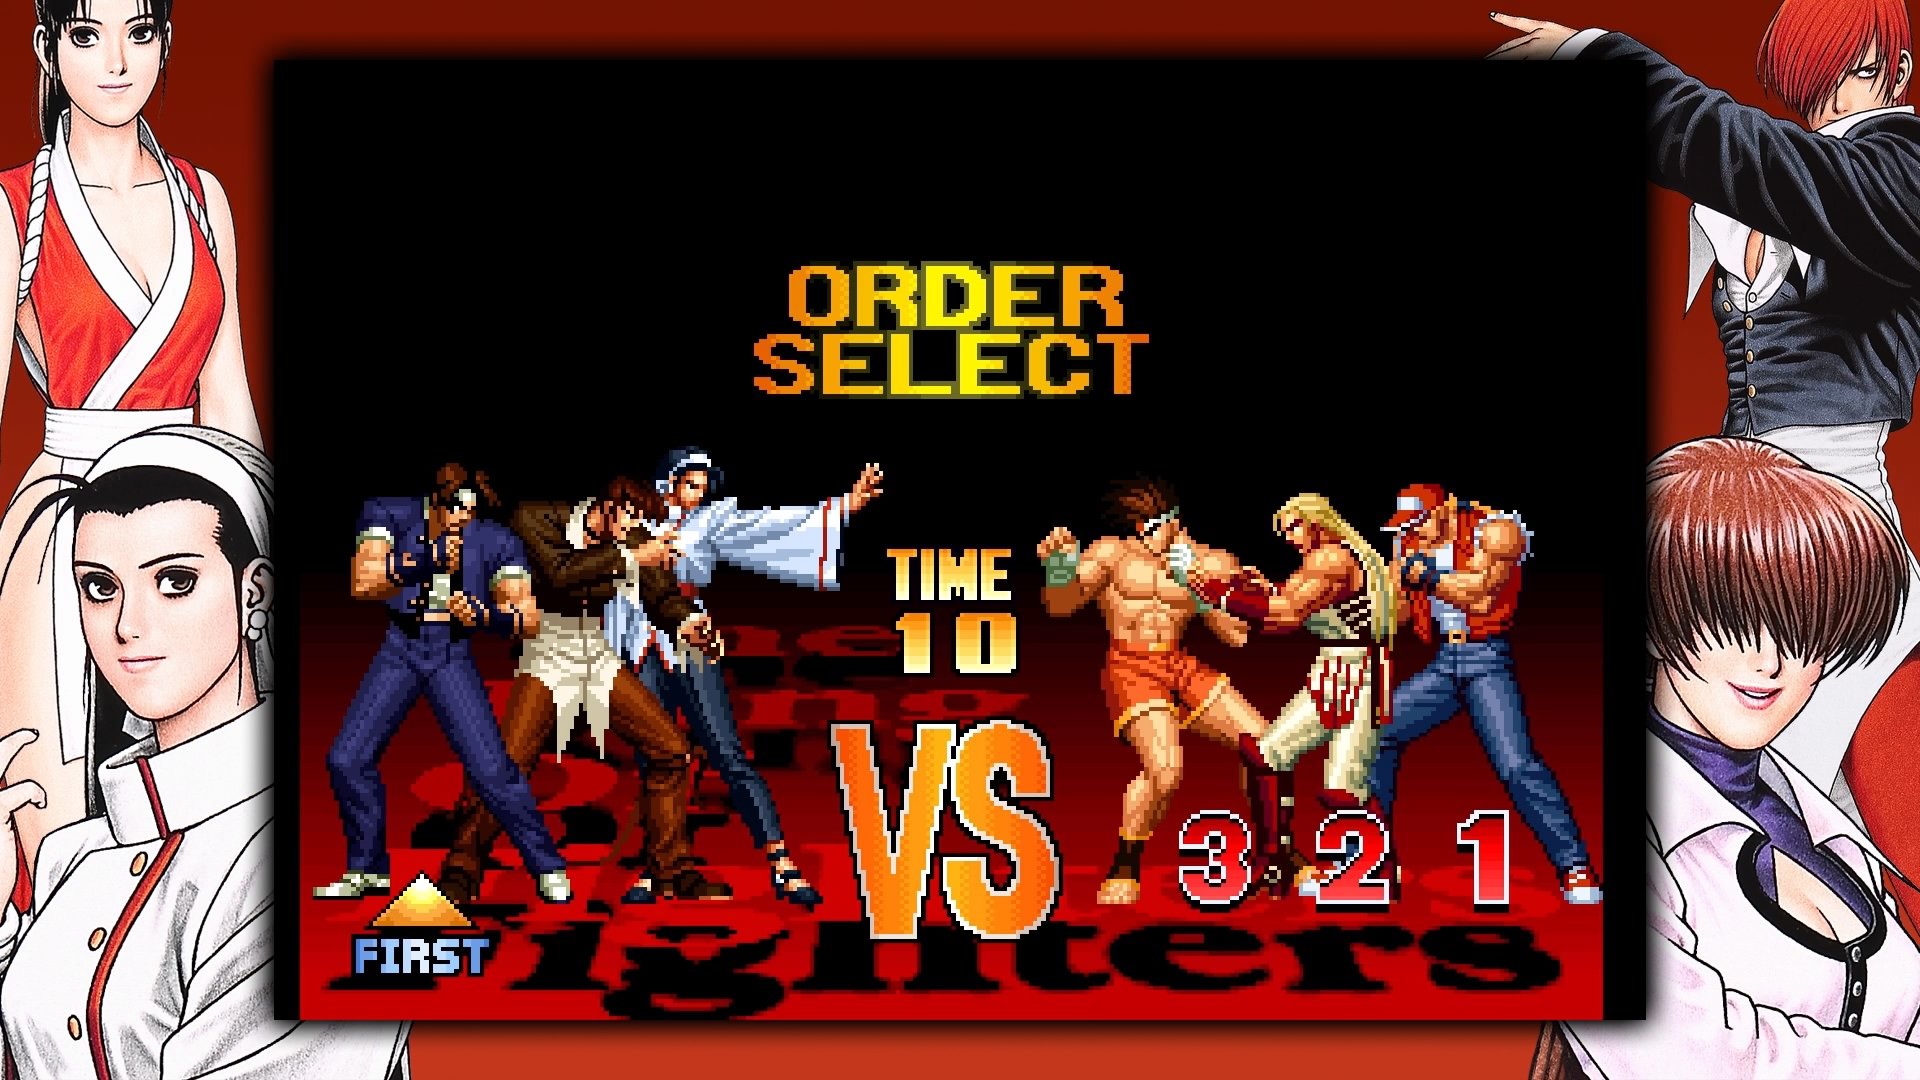 THE KING OF FIGHTERS '97 GLOBAL MATCH Crack Archives « Install